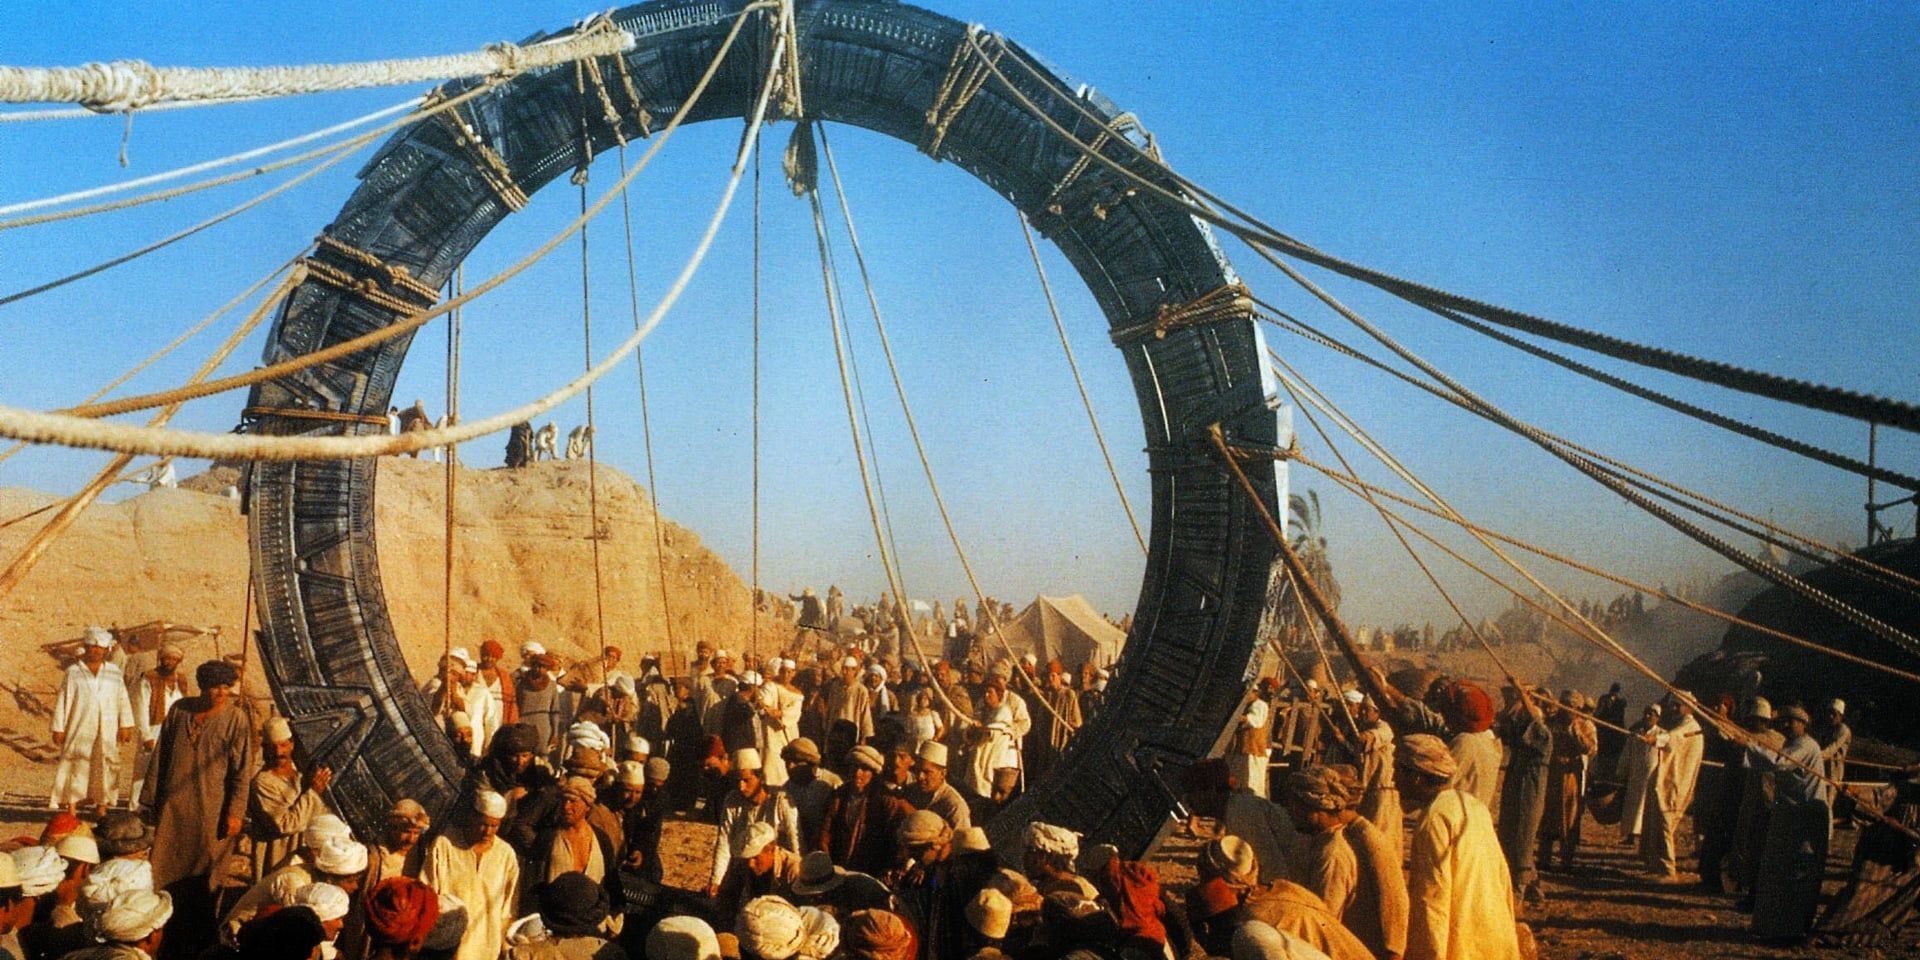 A Stargate in Ancient Egypt